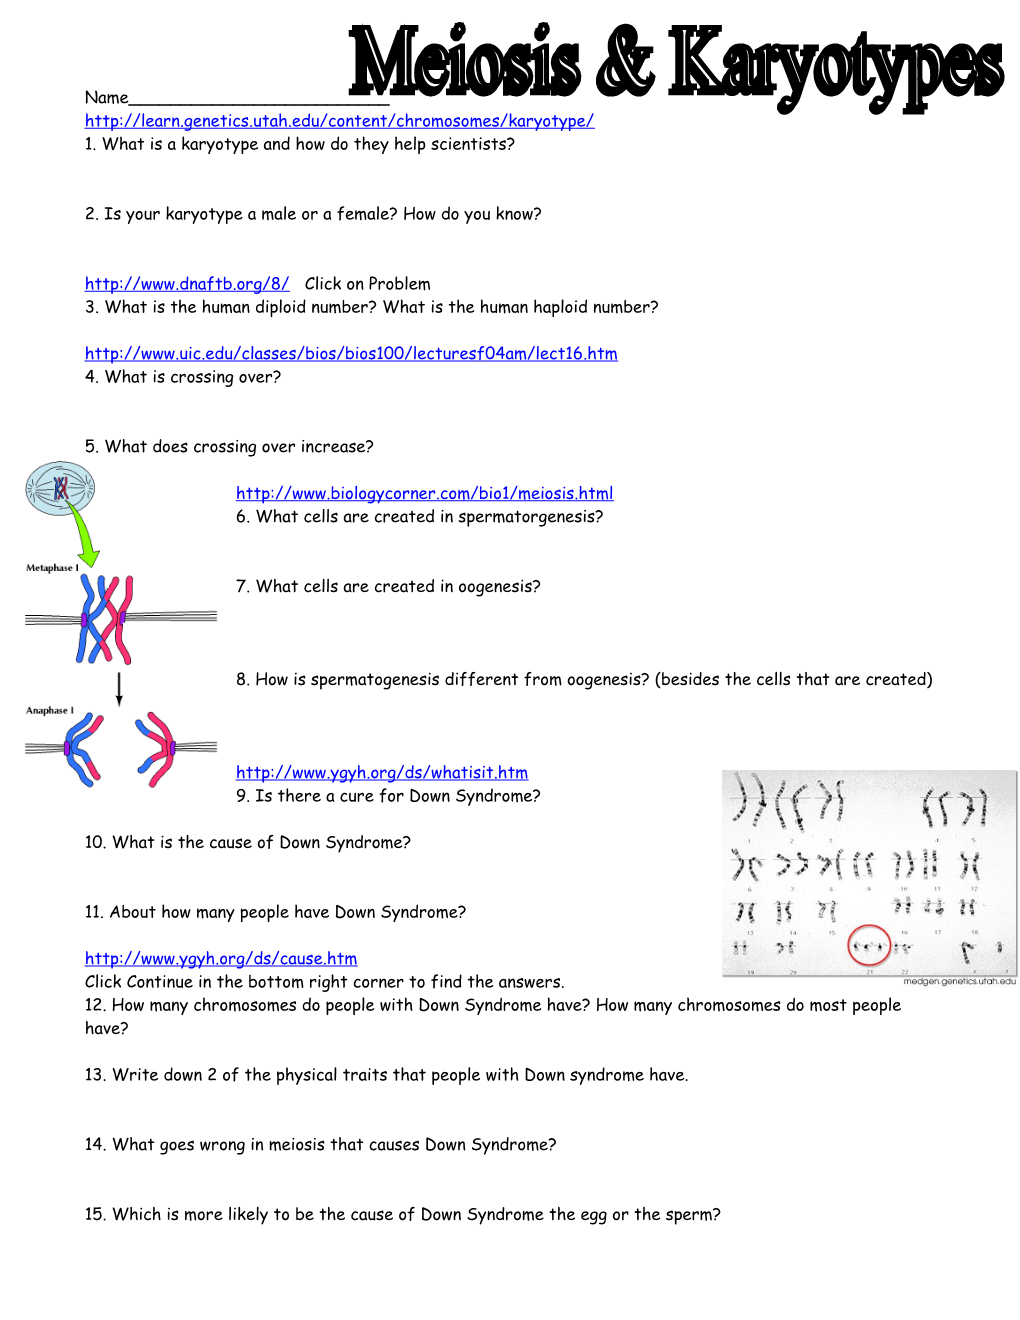 1. What Is a Karyotype and How Do They Help Scientists?